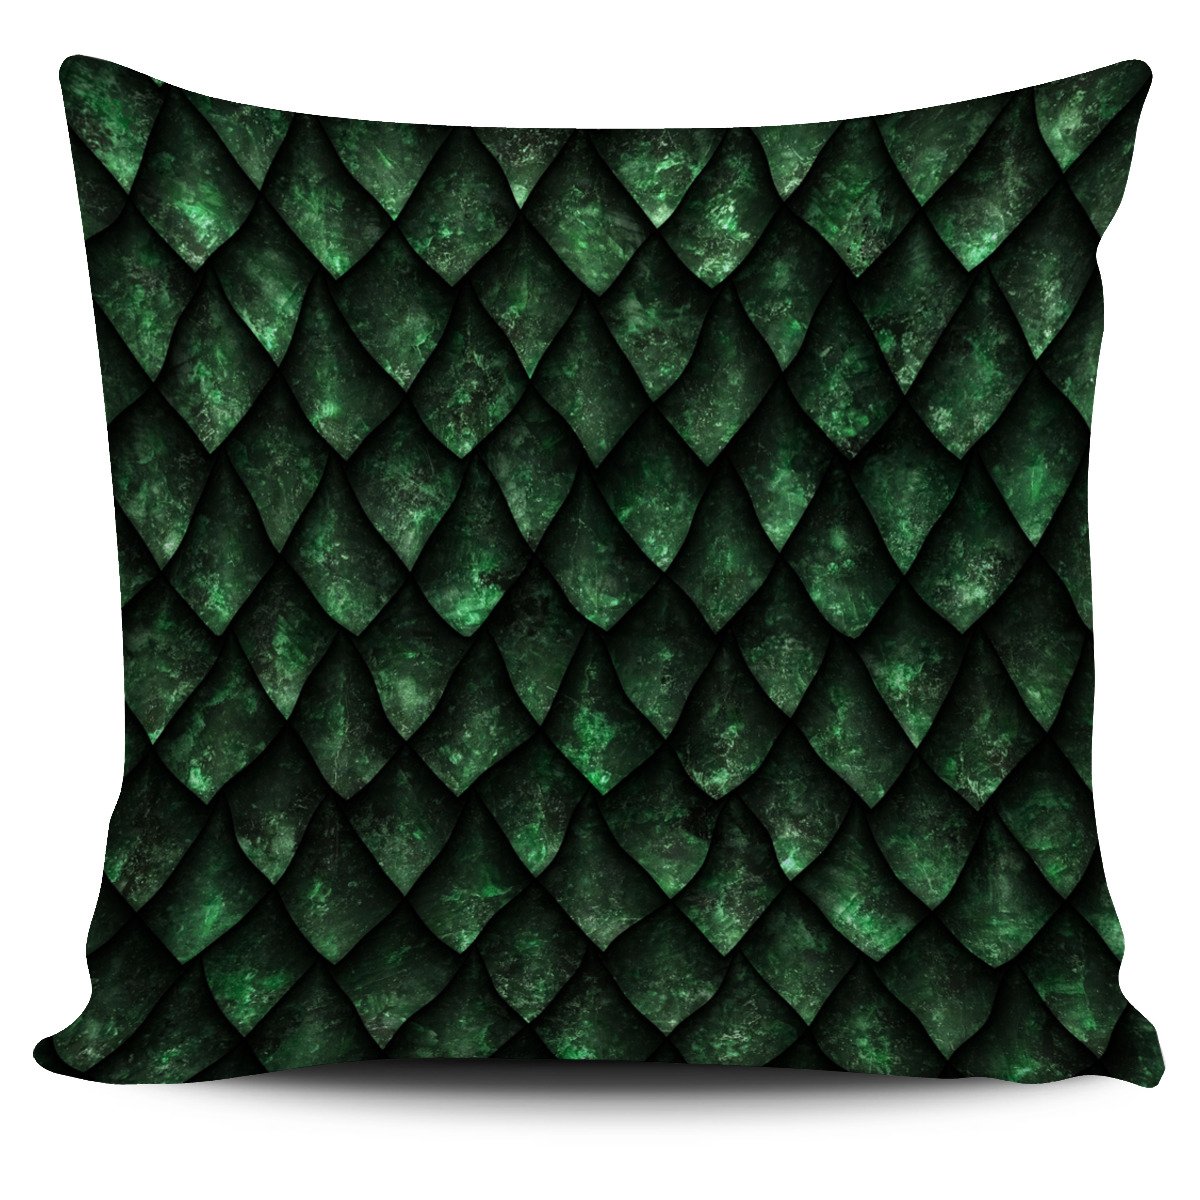 Green Dragon Scales Pattern Print Pillow Cover